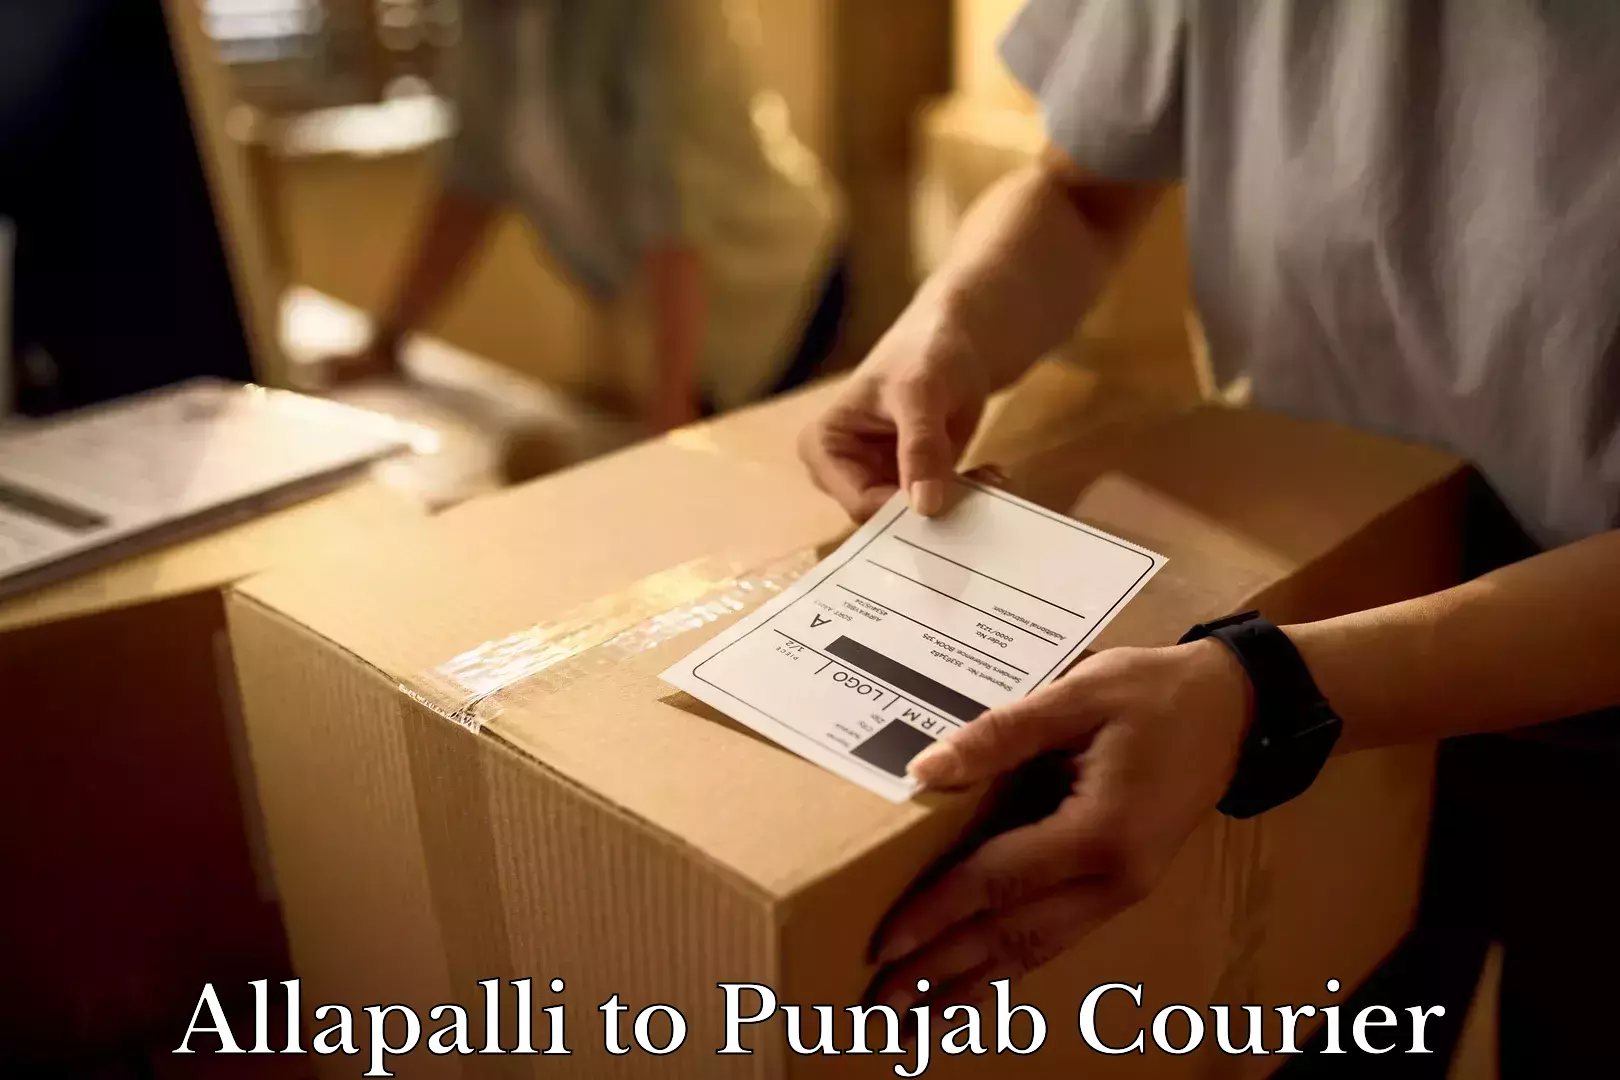 Furniture moving services Allapalli to Punjab